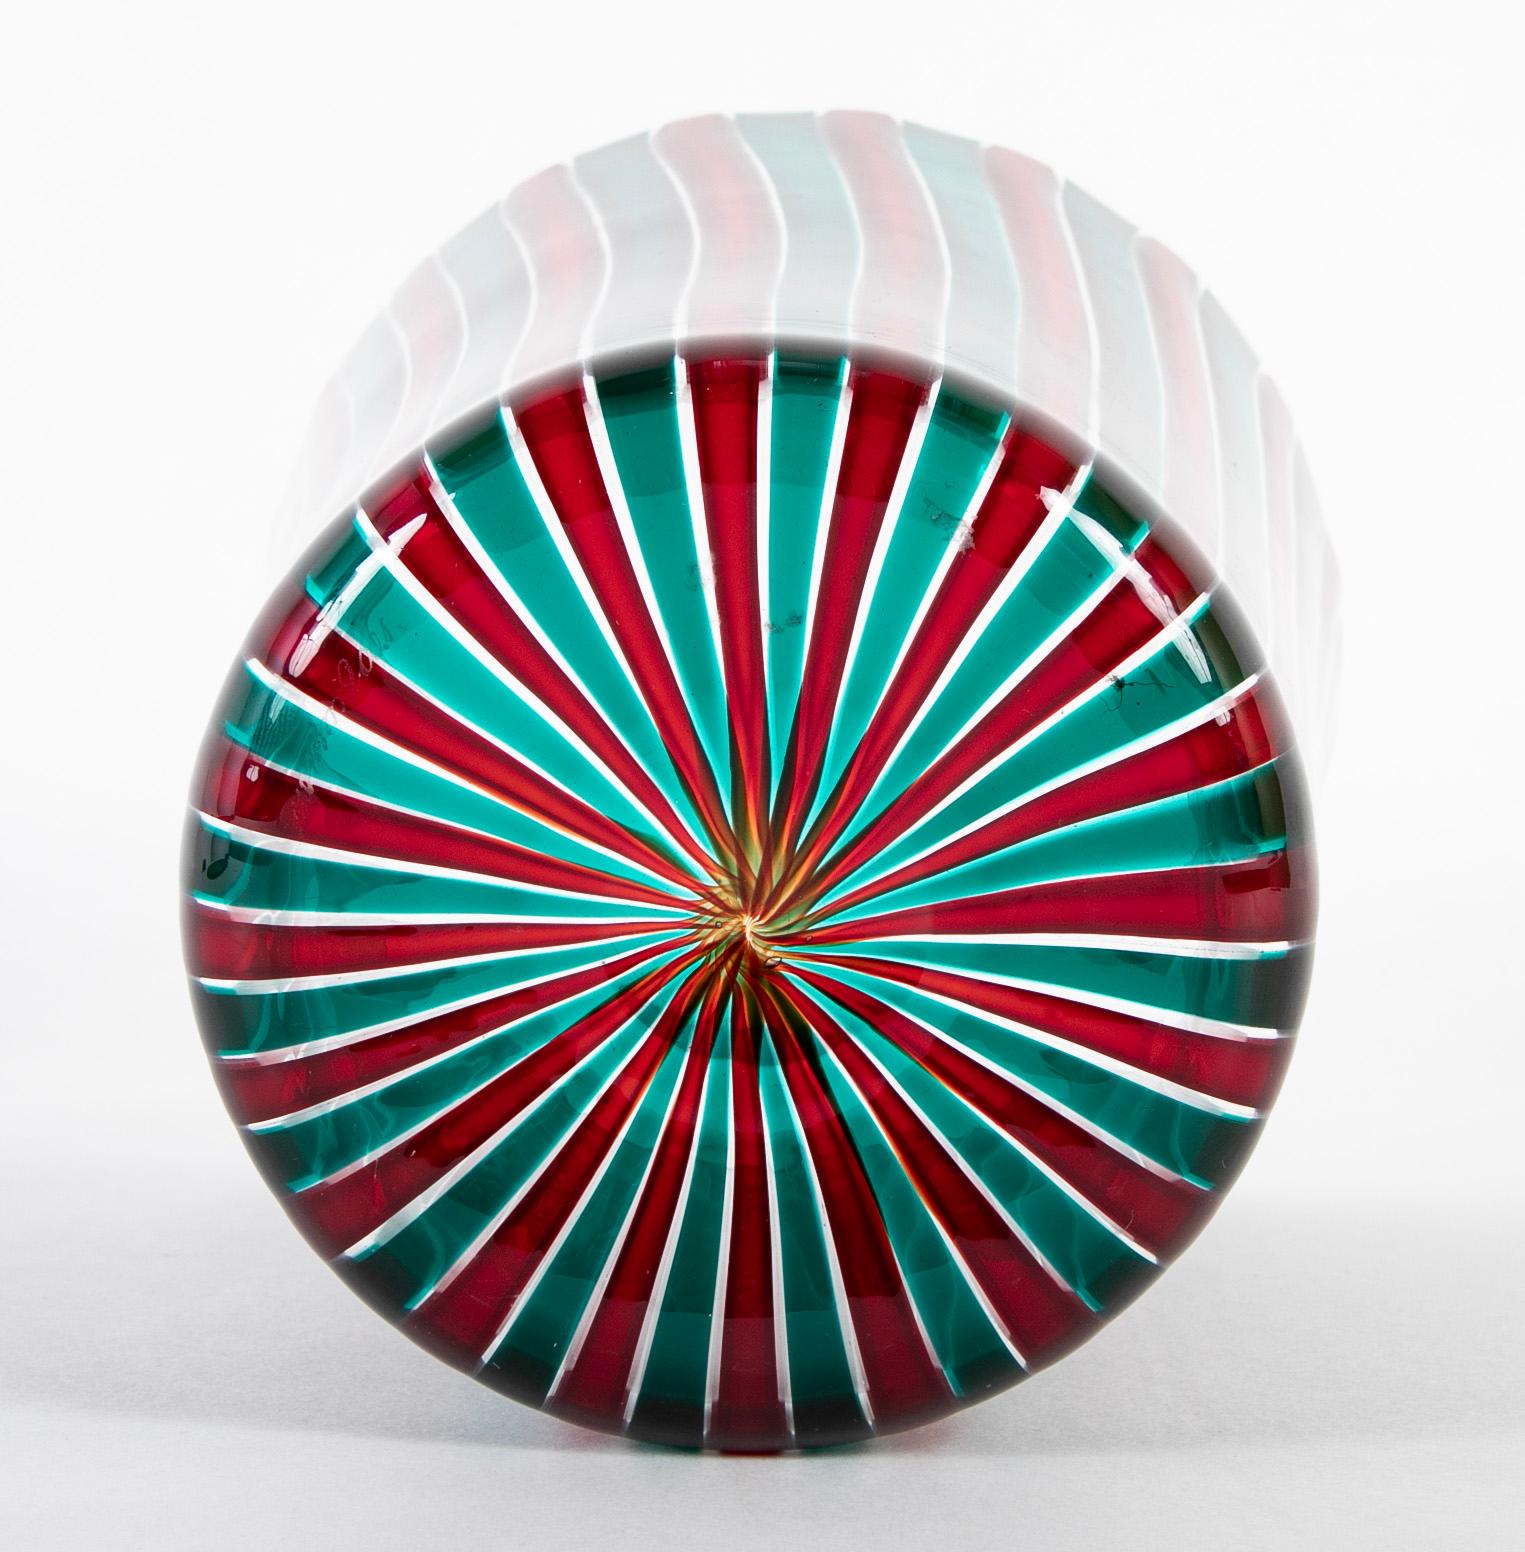 Gio Ponti for Venini Red and Green 